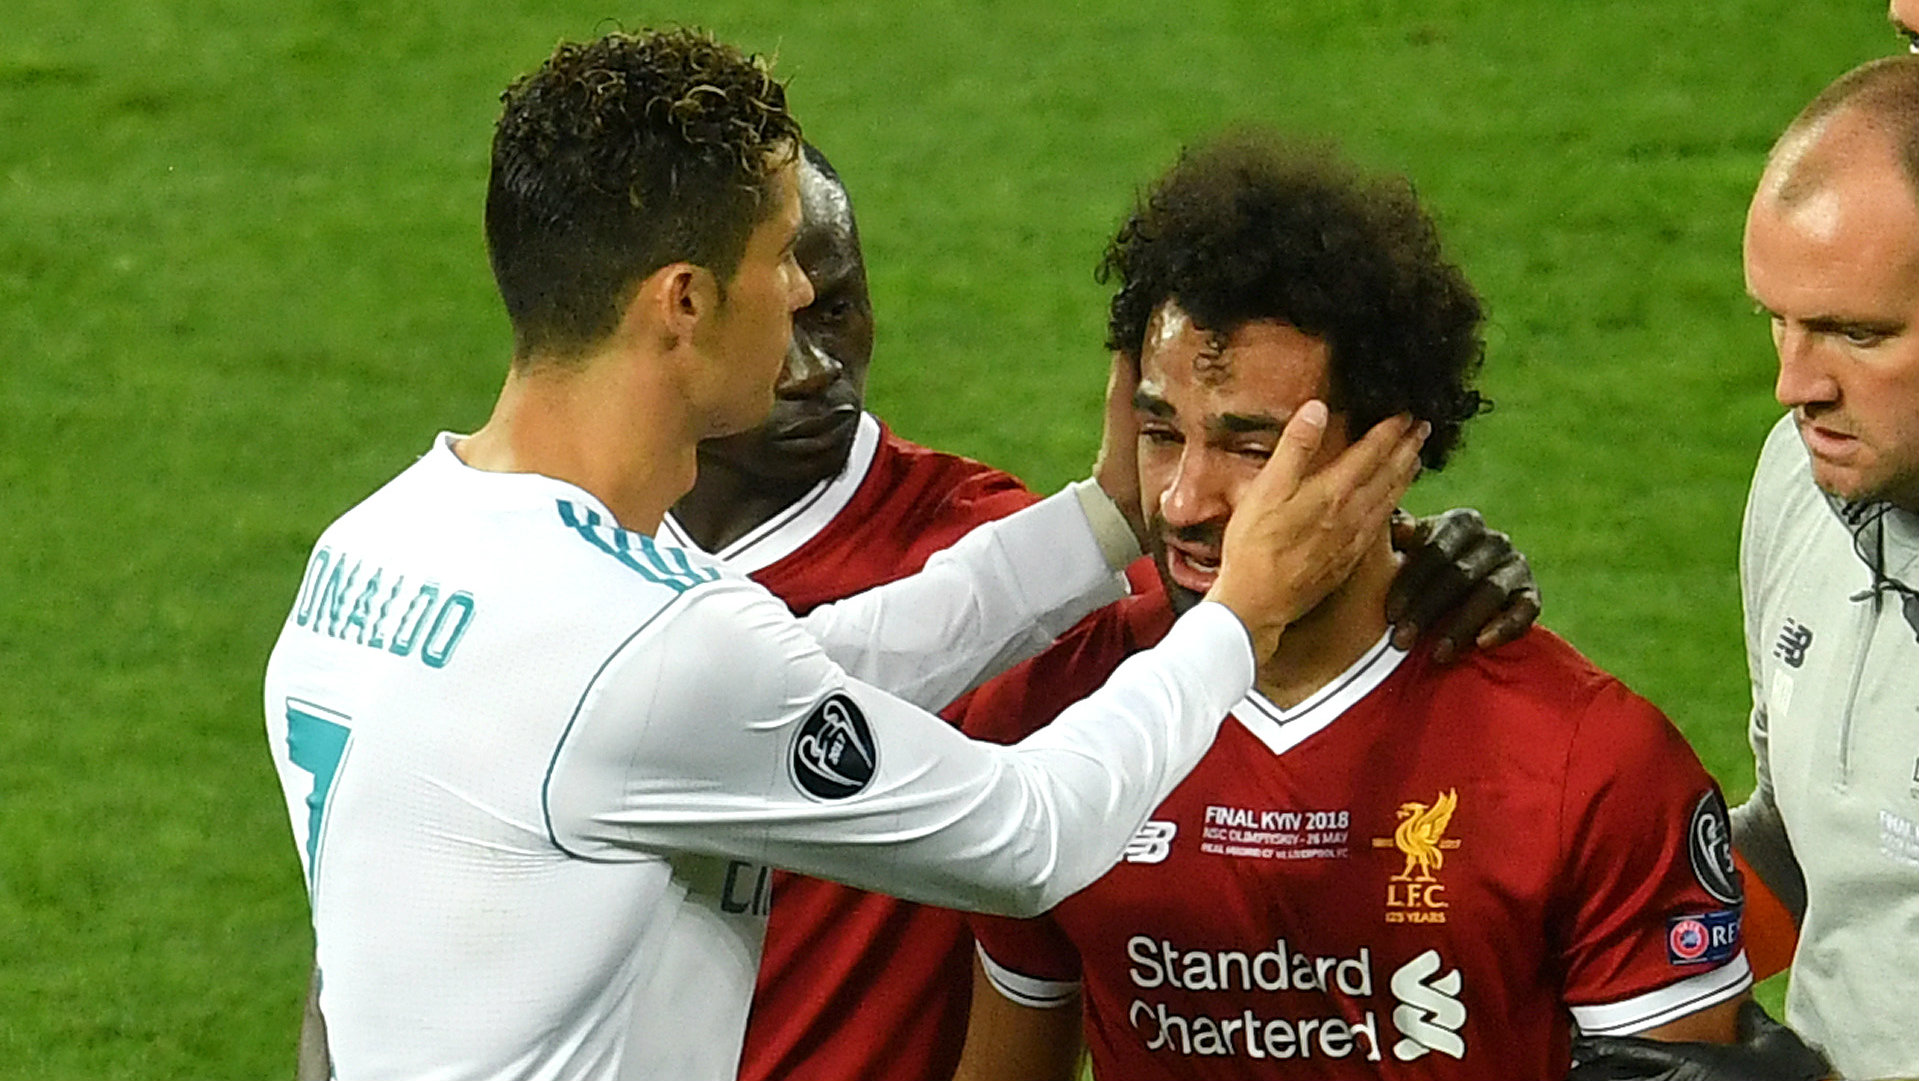 Mohamed Salah statue: Liverpool star matches Cristiano Ronaldo after bizarre statue ...1919 x 1081